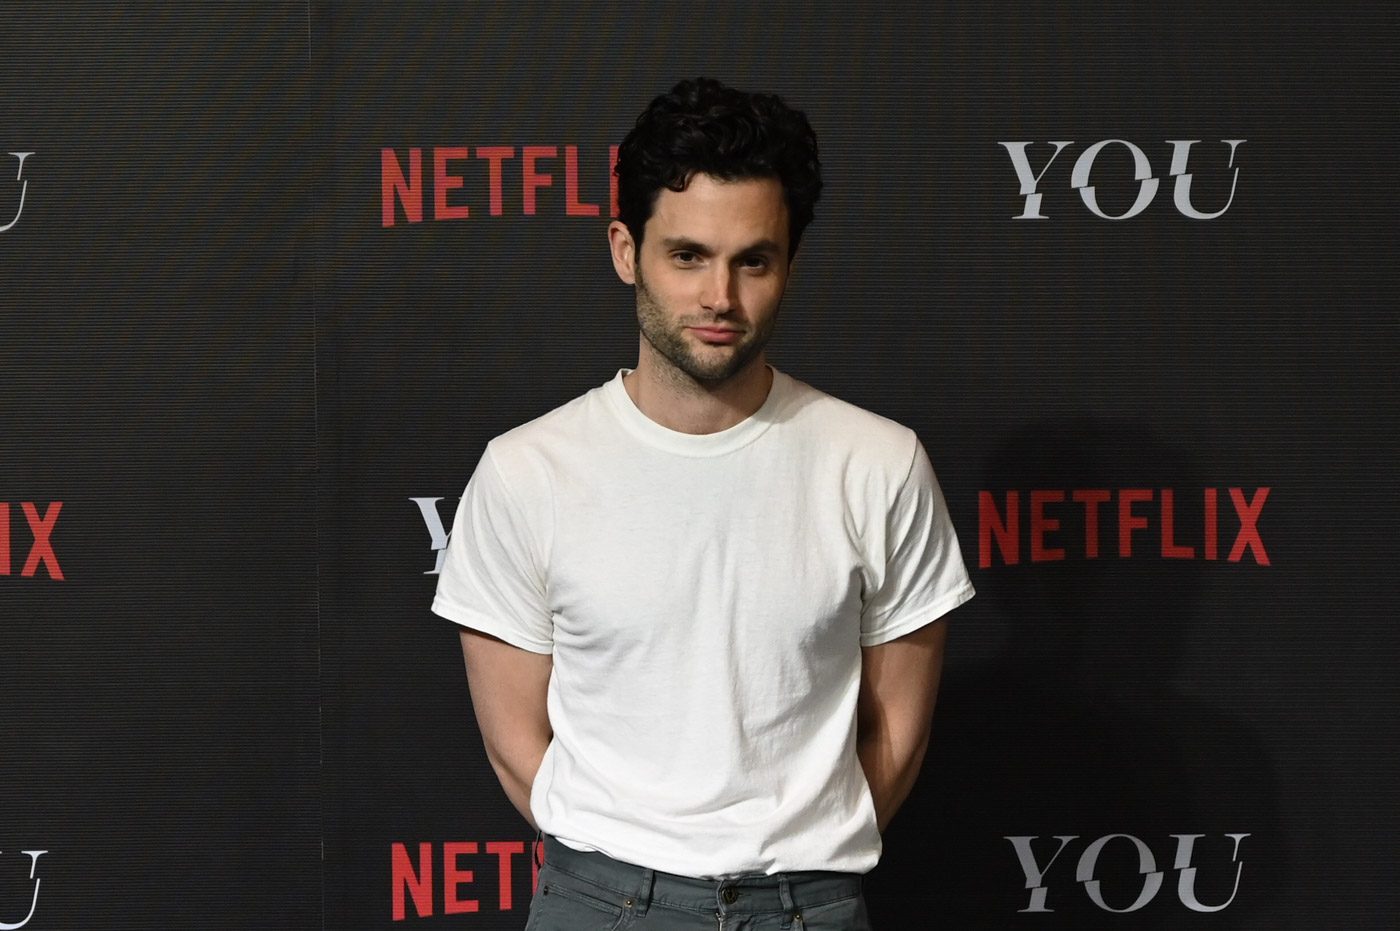 Penn Badgley of ‘You’ on how to play a creep